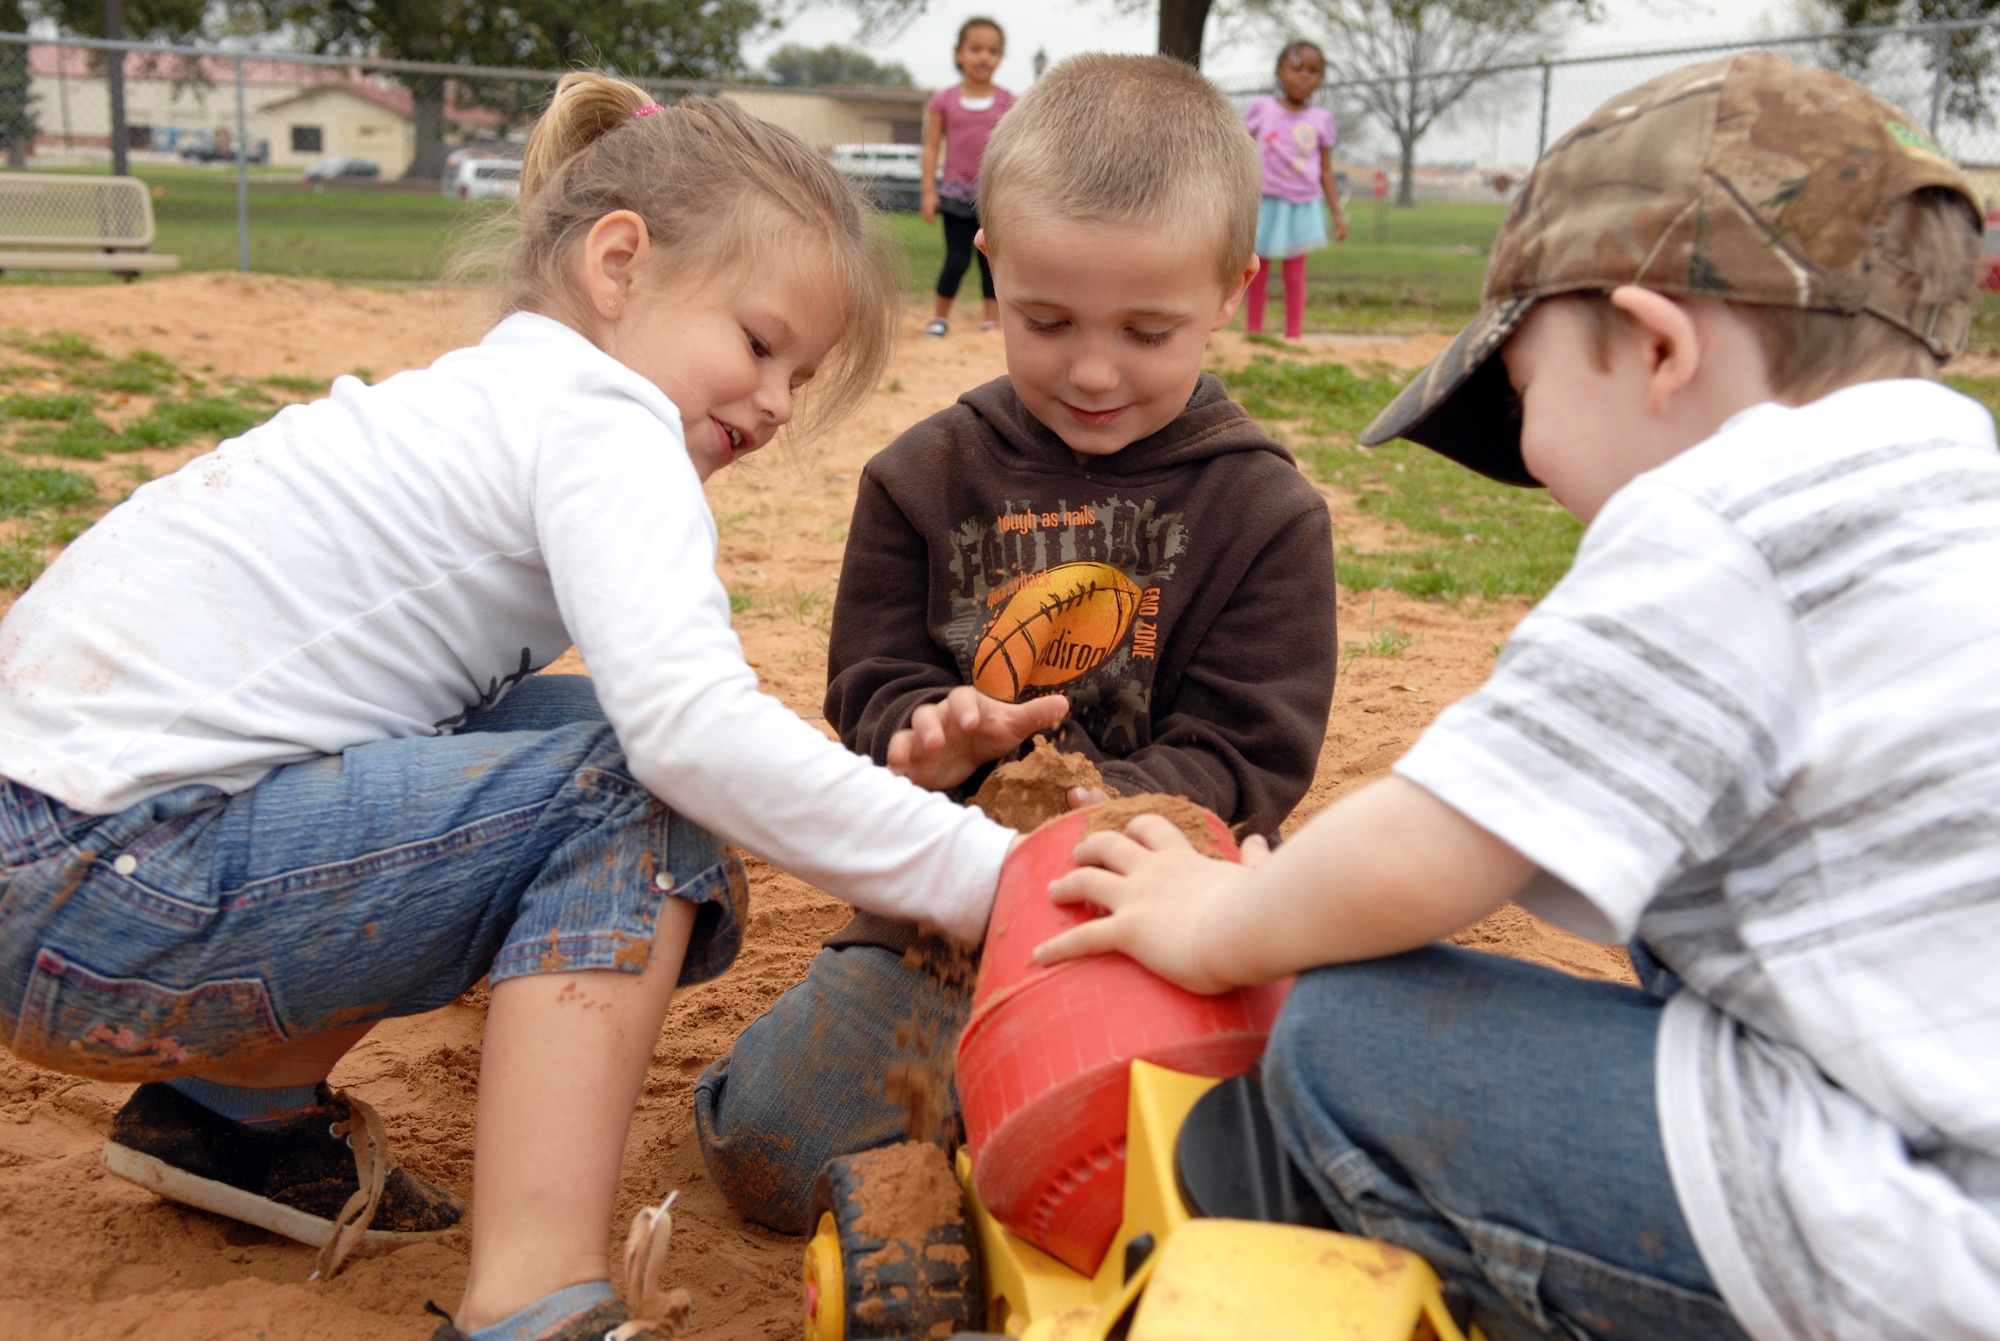 Children fill a toy truck with dirt at the Child Development Center on Barksdale Air Force Base, La., Feb. 29. Digging holes and playing in the dirt are some of the many activities the children can participate in while outside. (U.S. Air Force photo/Airman 1st Class Joseph A. Pagán Jr.)(RELEASED)